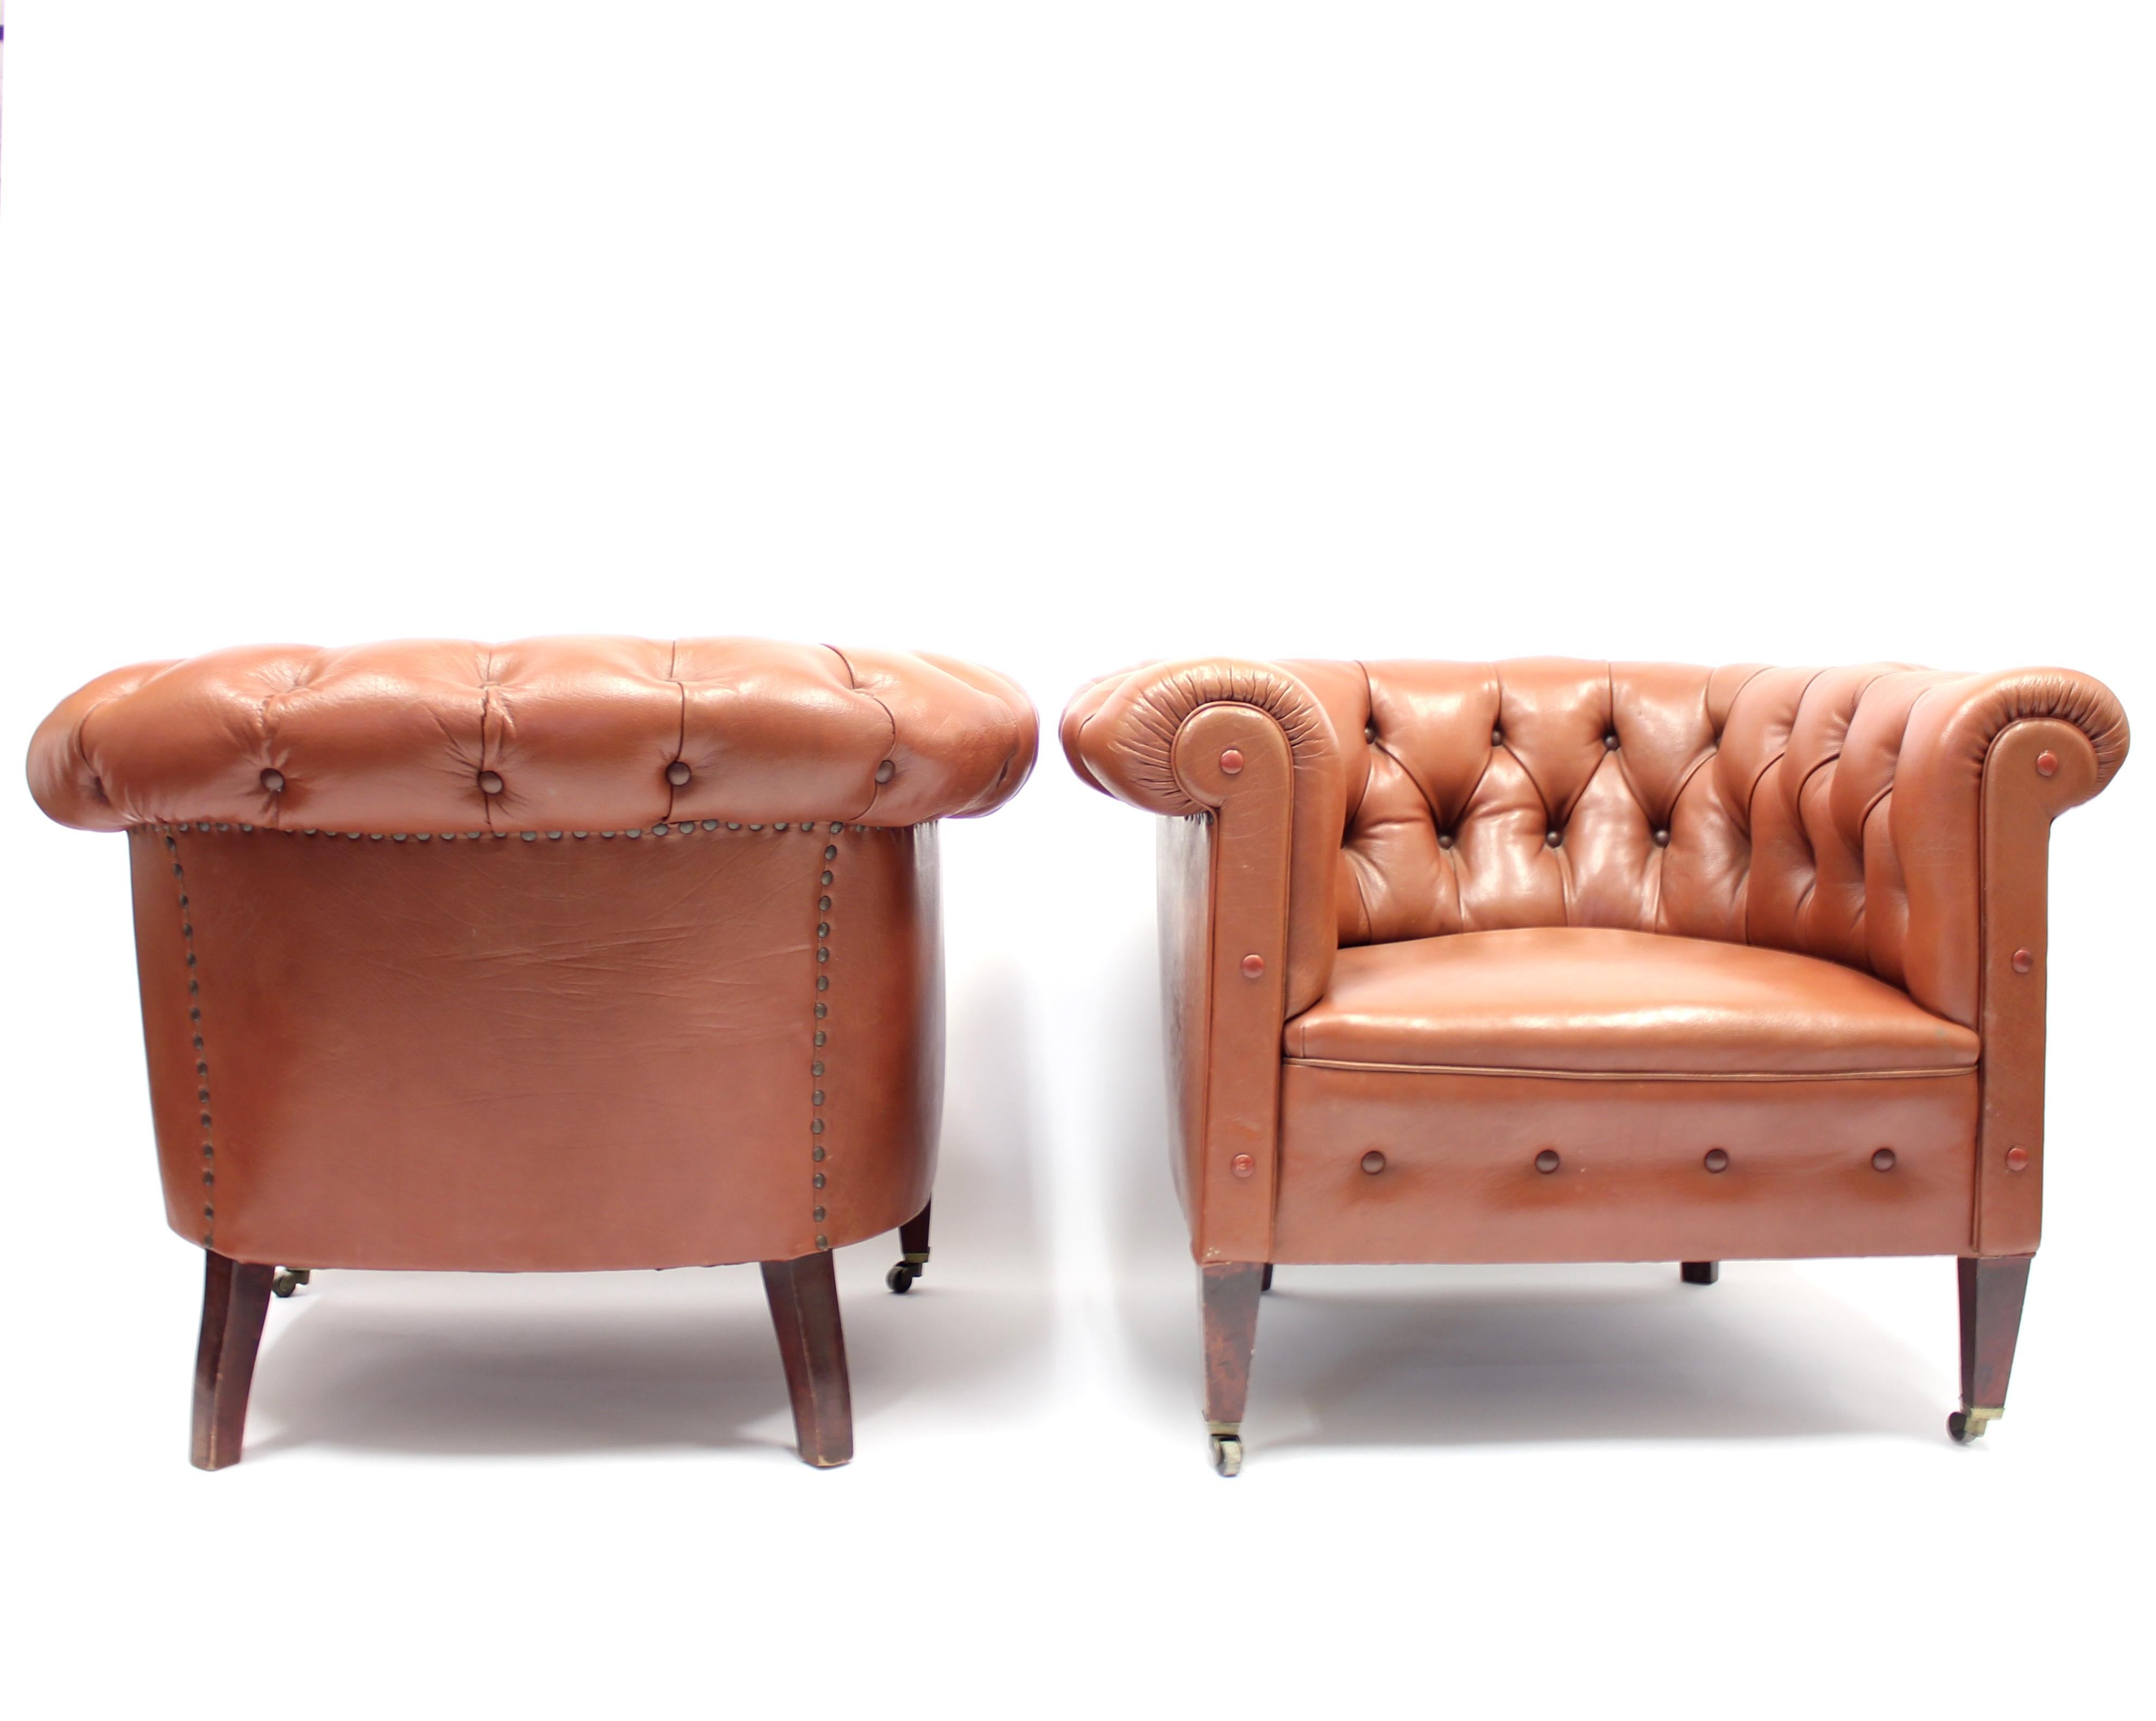 Brass Pair of Chesterfield Club Chairs on Castors, 1940s